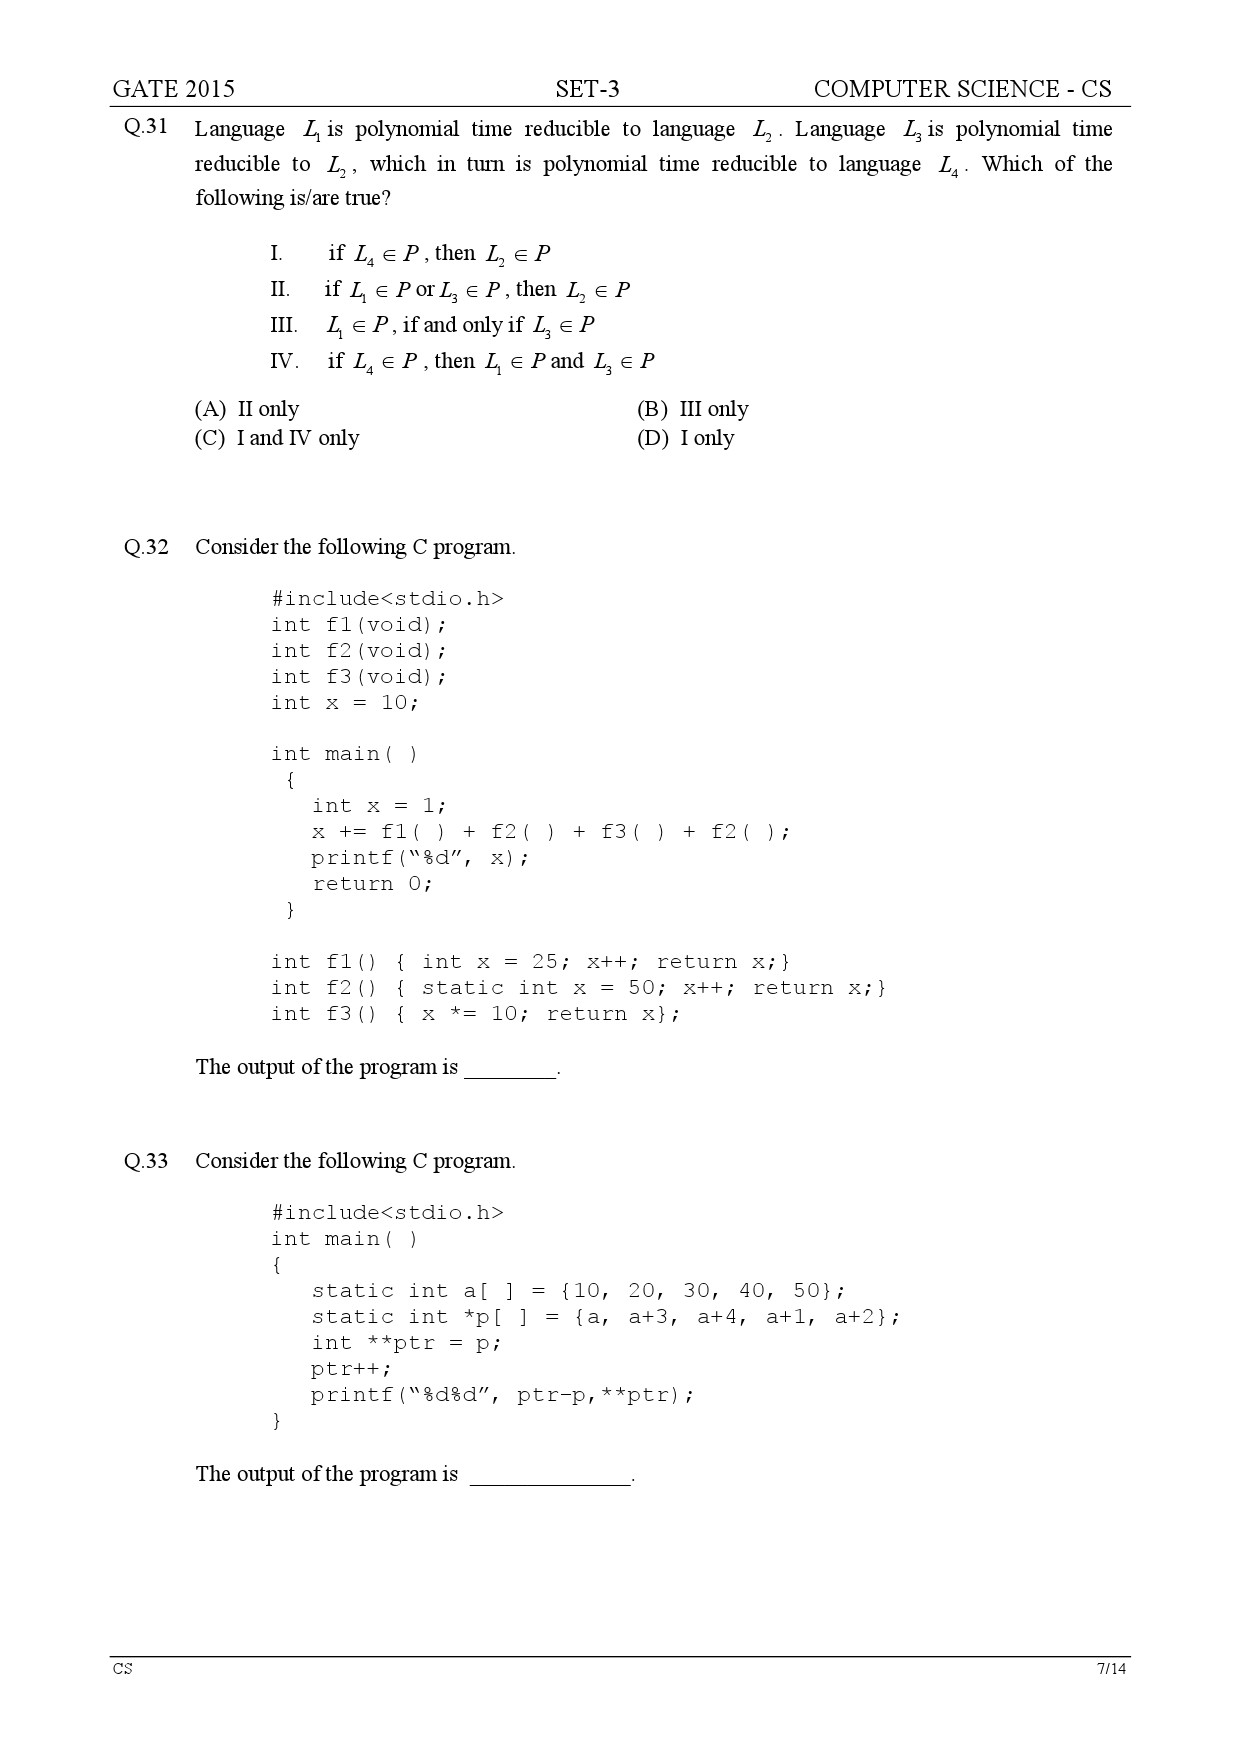 GATE Exam Question Paper 2015 Computer Science and Information Technology Set 3 7